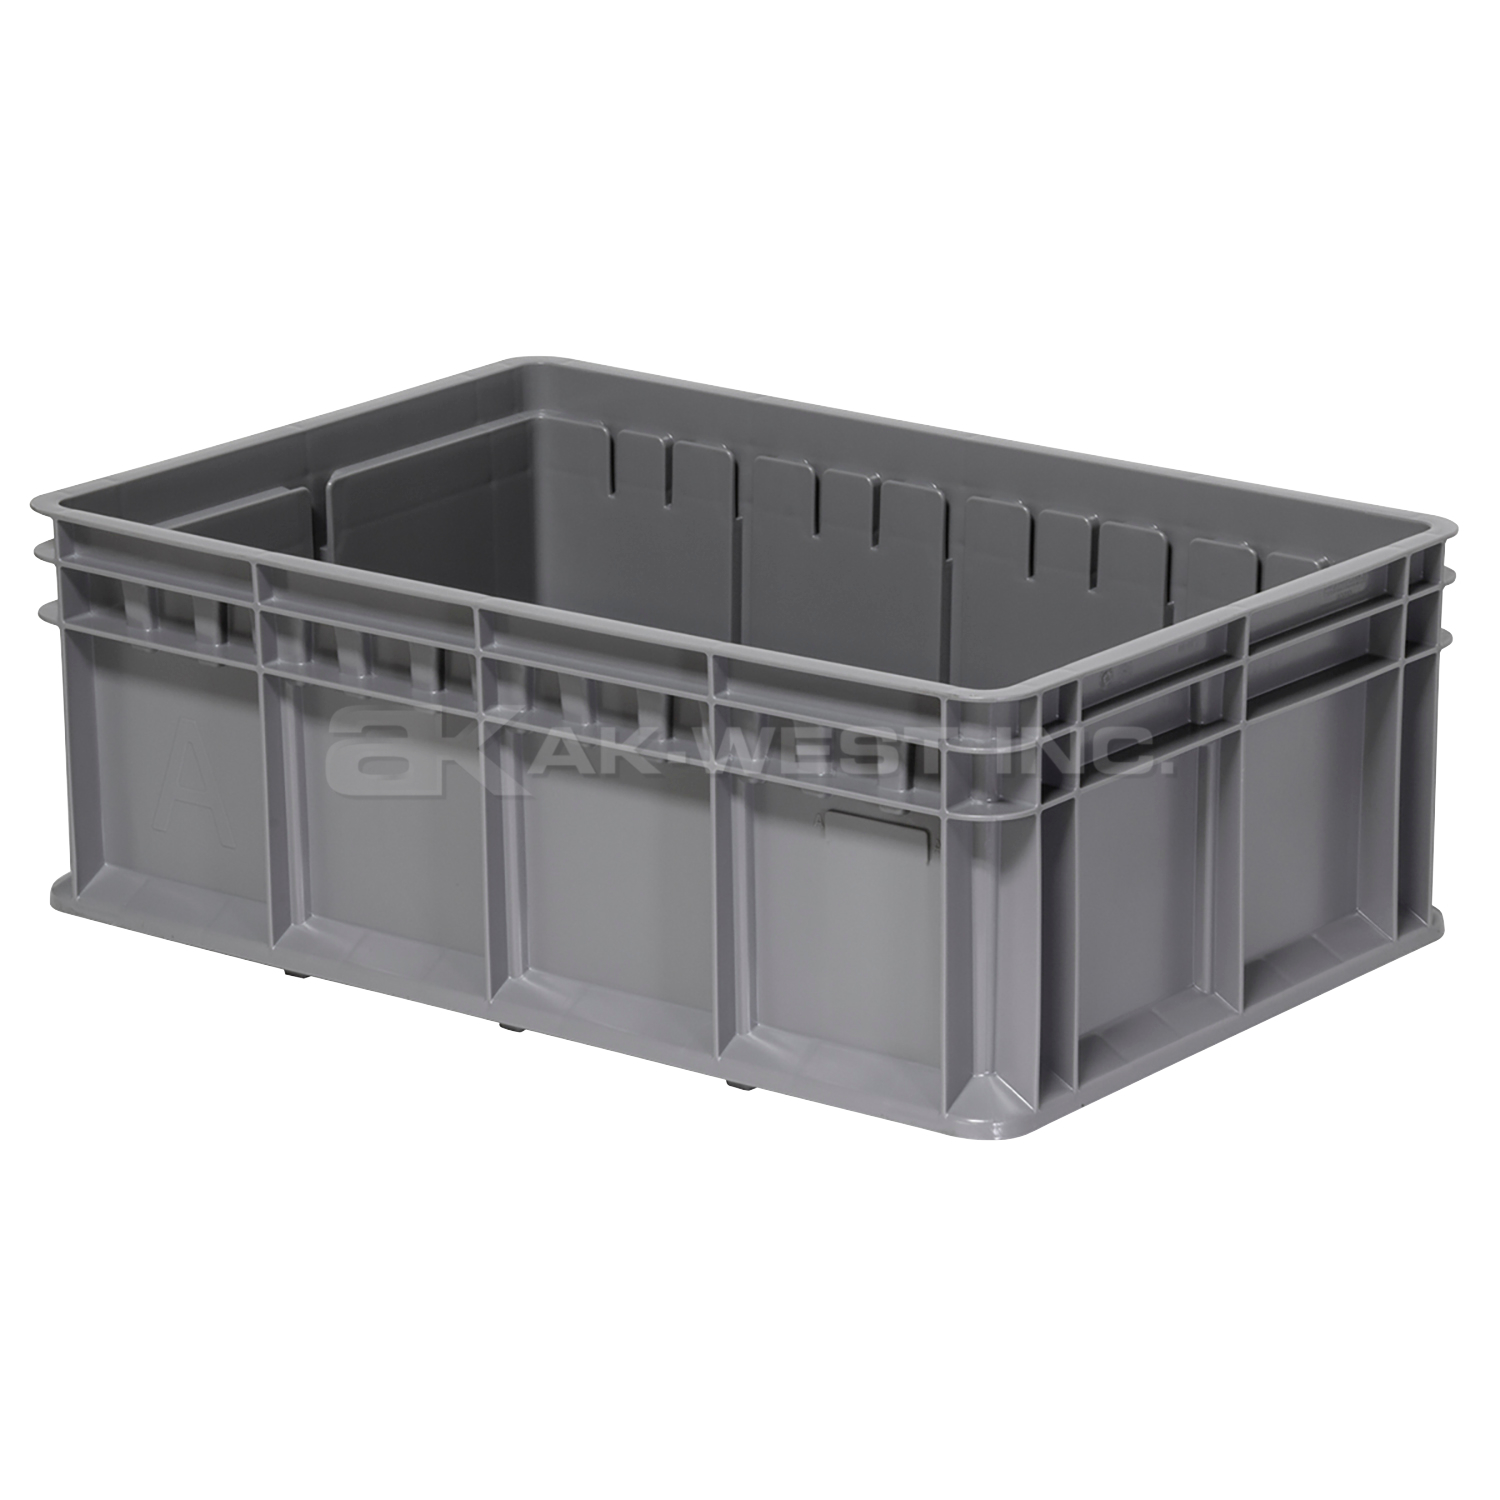 Grey, 23-5/8" x 15-3/4" x 8-21/32", Solid Side and Base, Straight Wall Container (4 Per Carton)